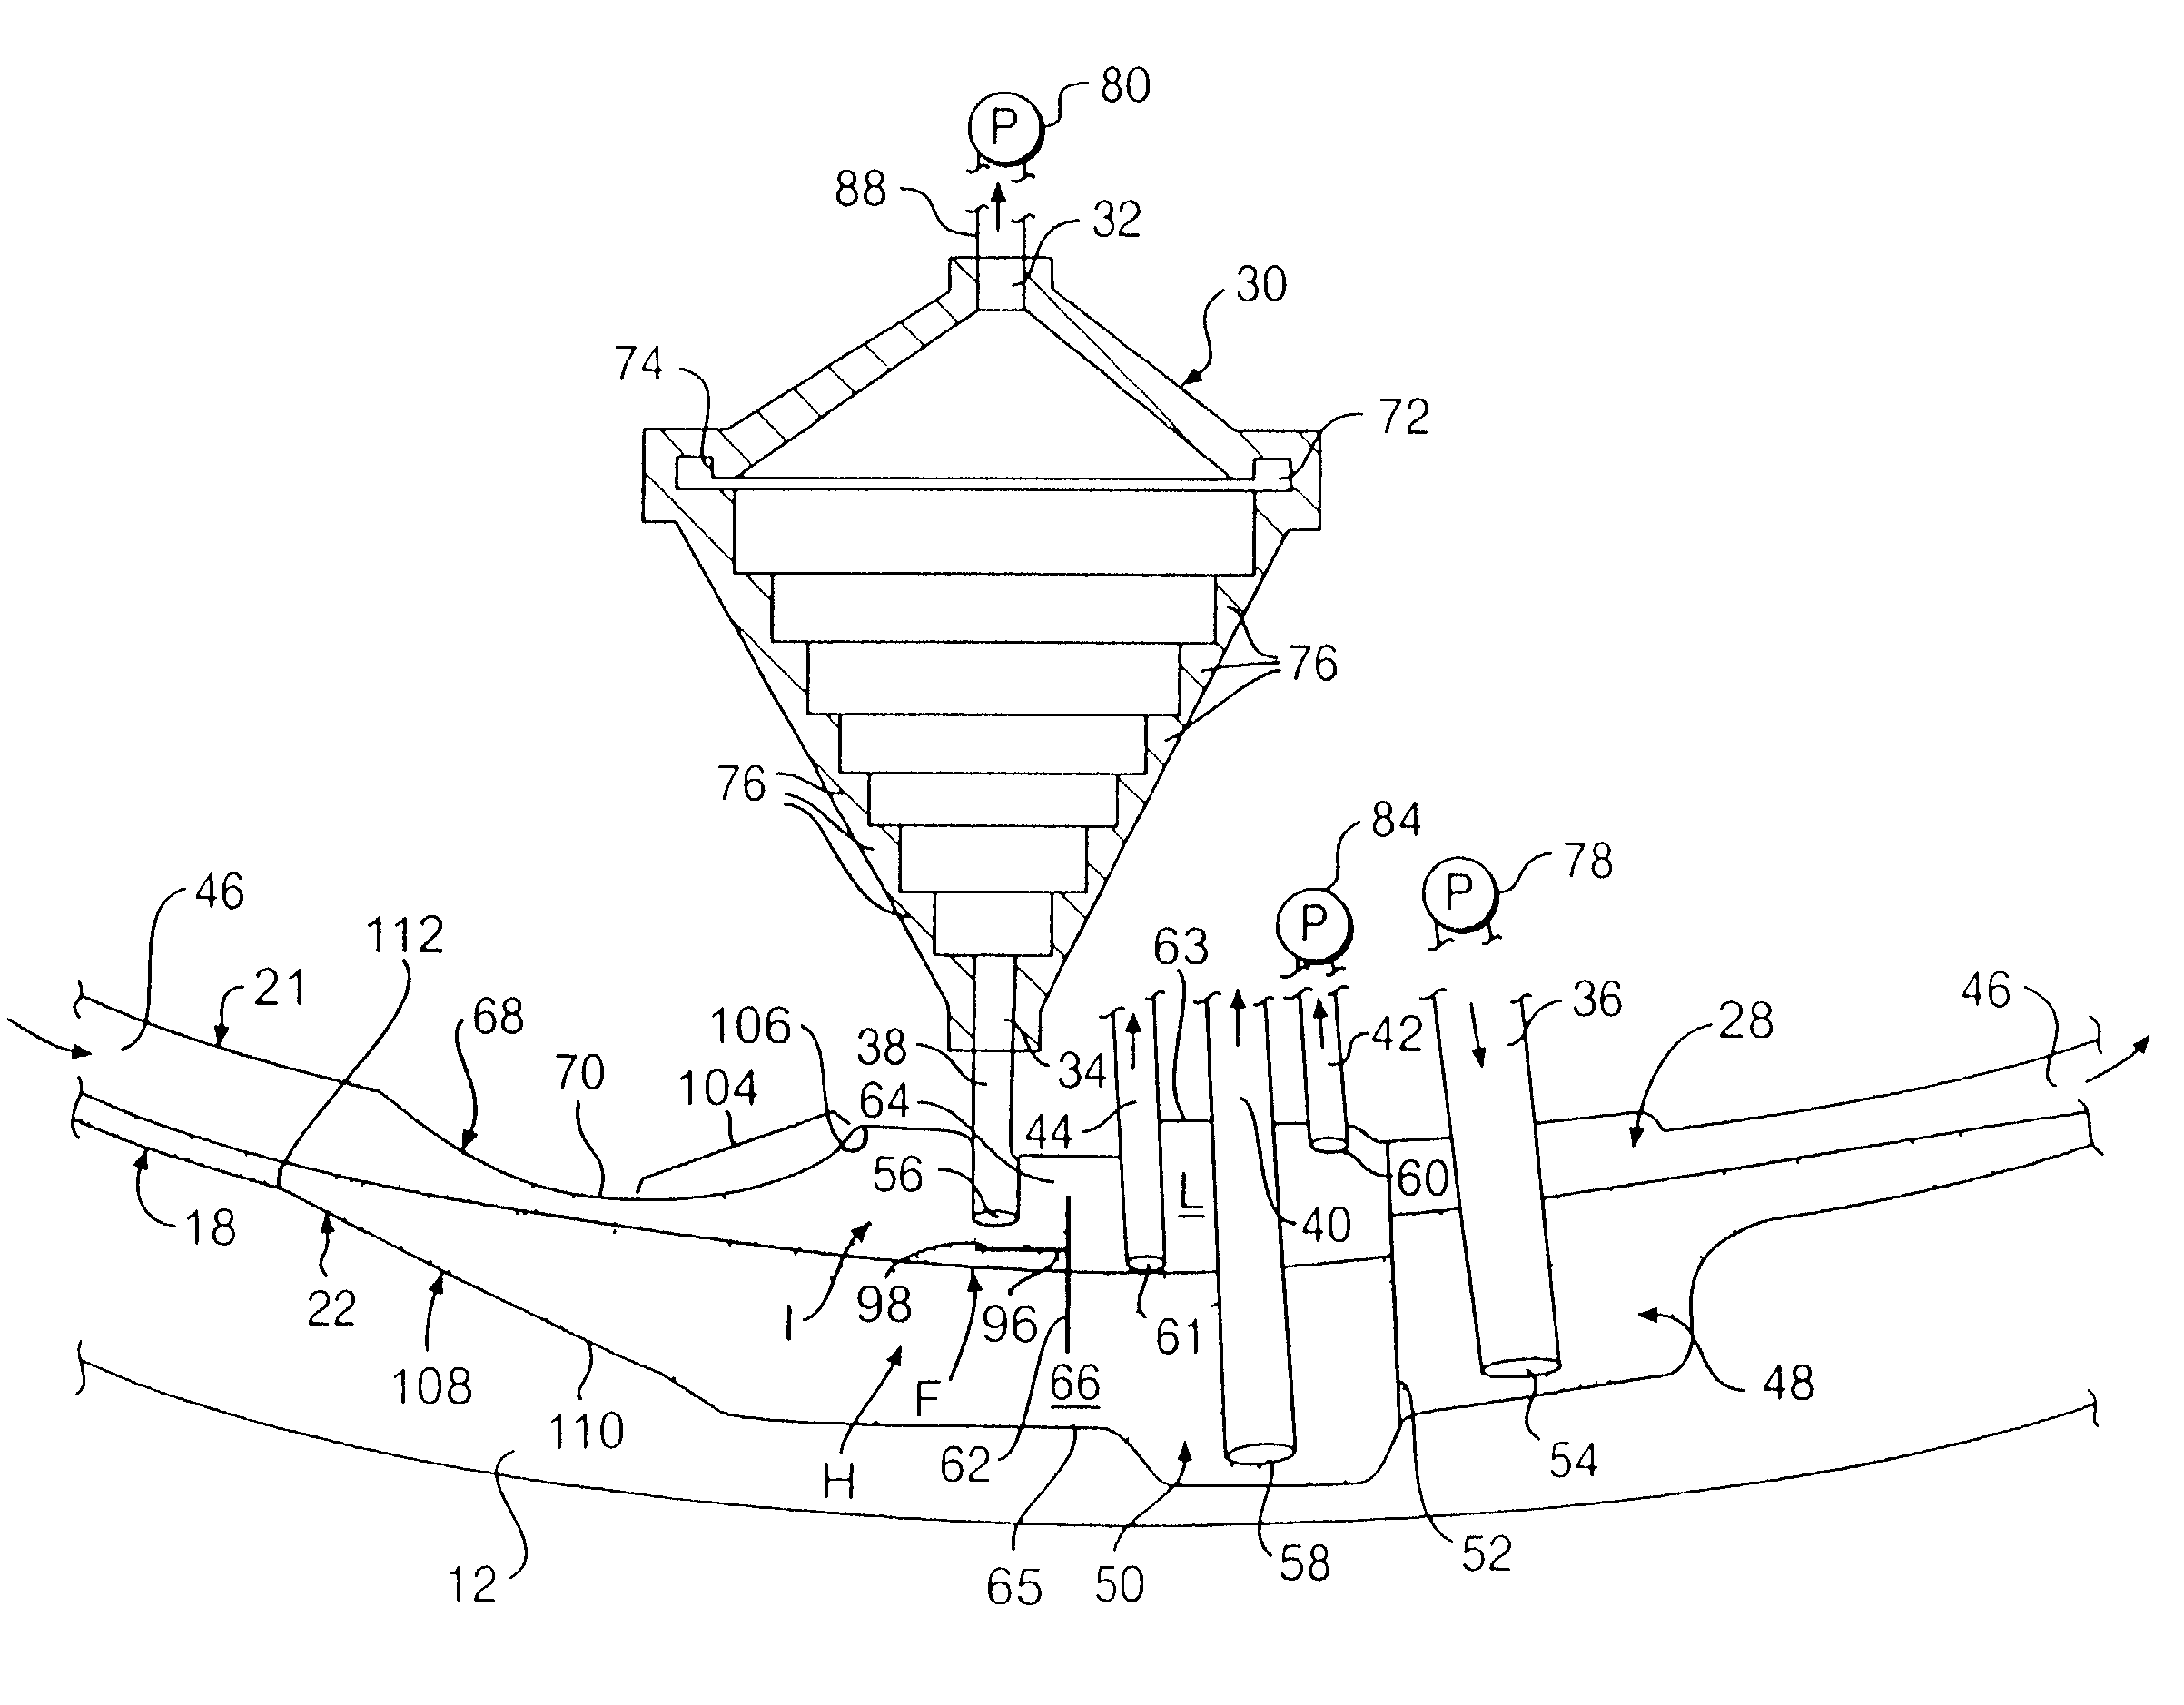 Centrifugal separation apparatus and method for separating fluid components